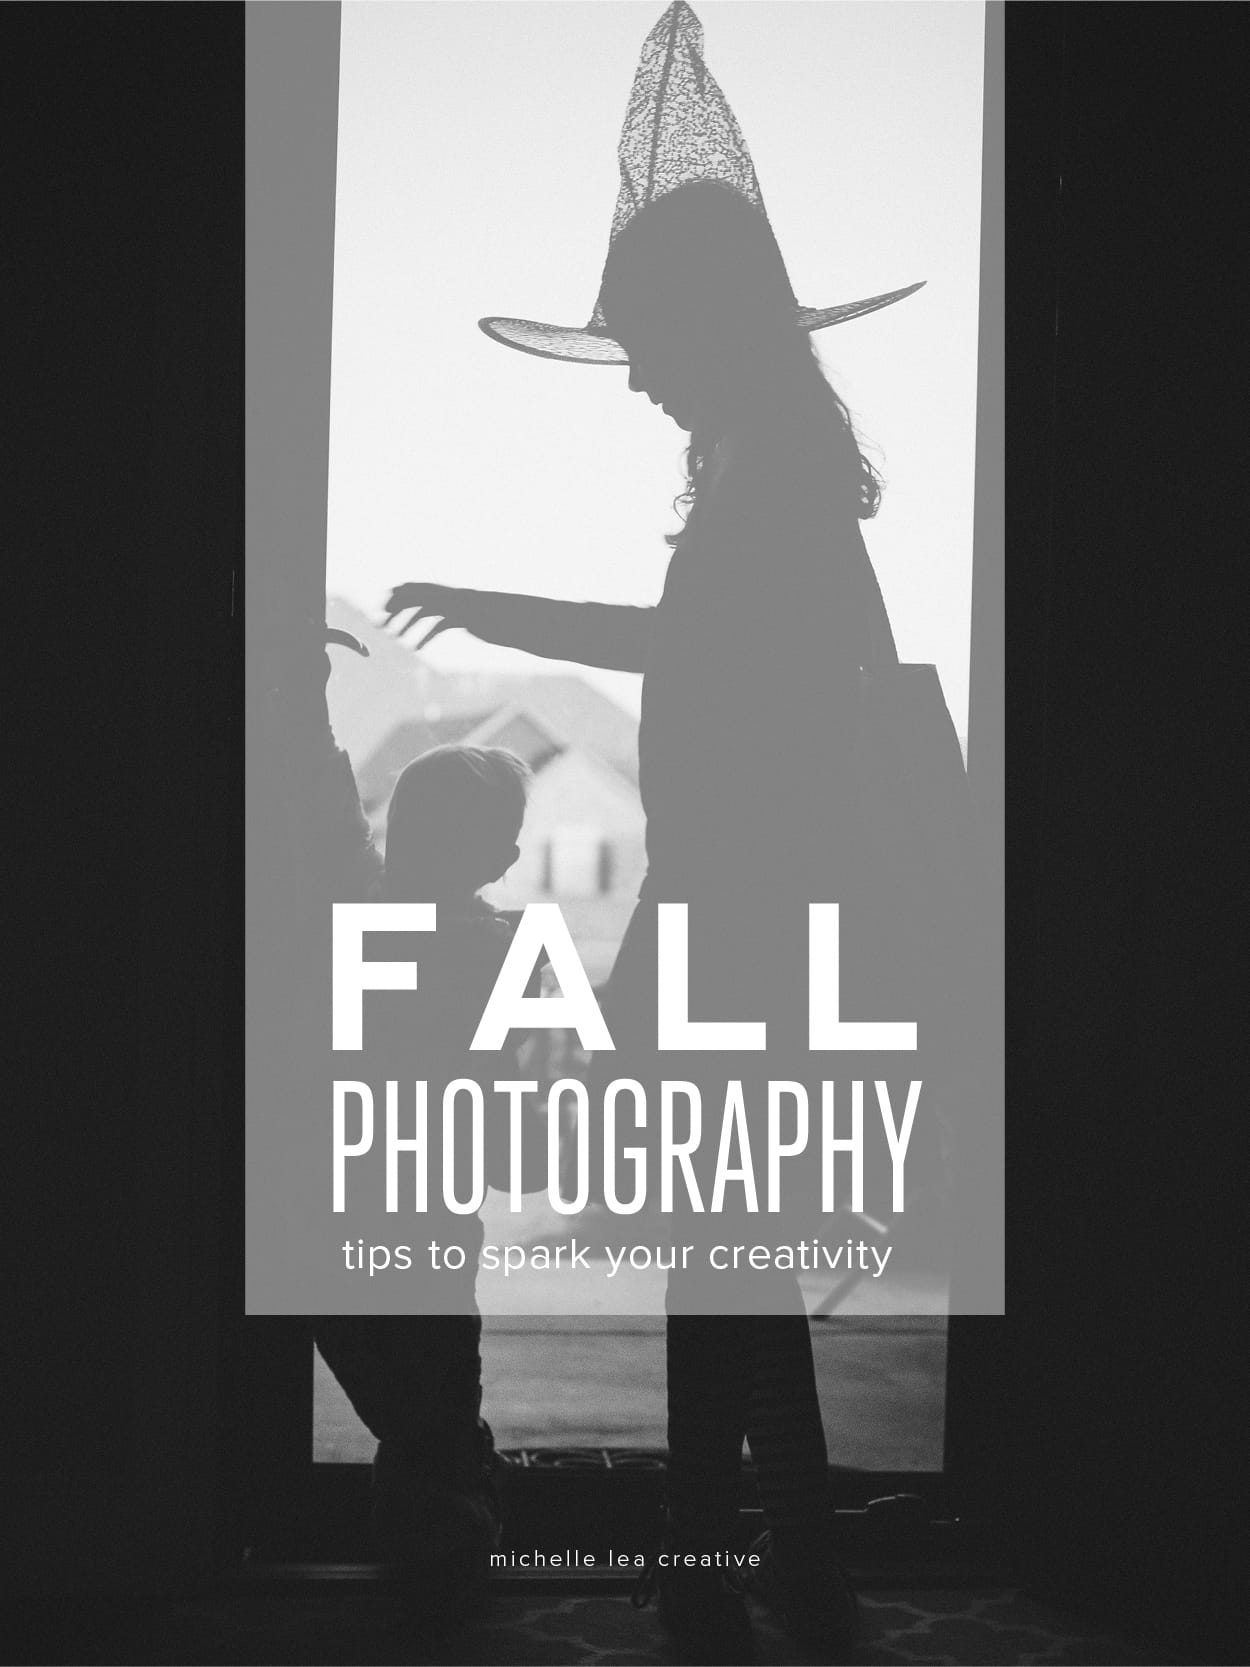 Fall Photography Tips to Spark Your Creativity